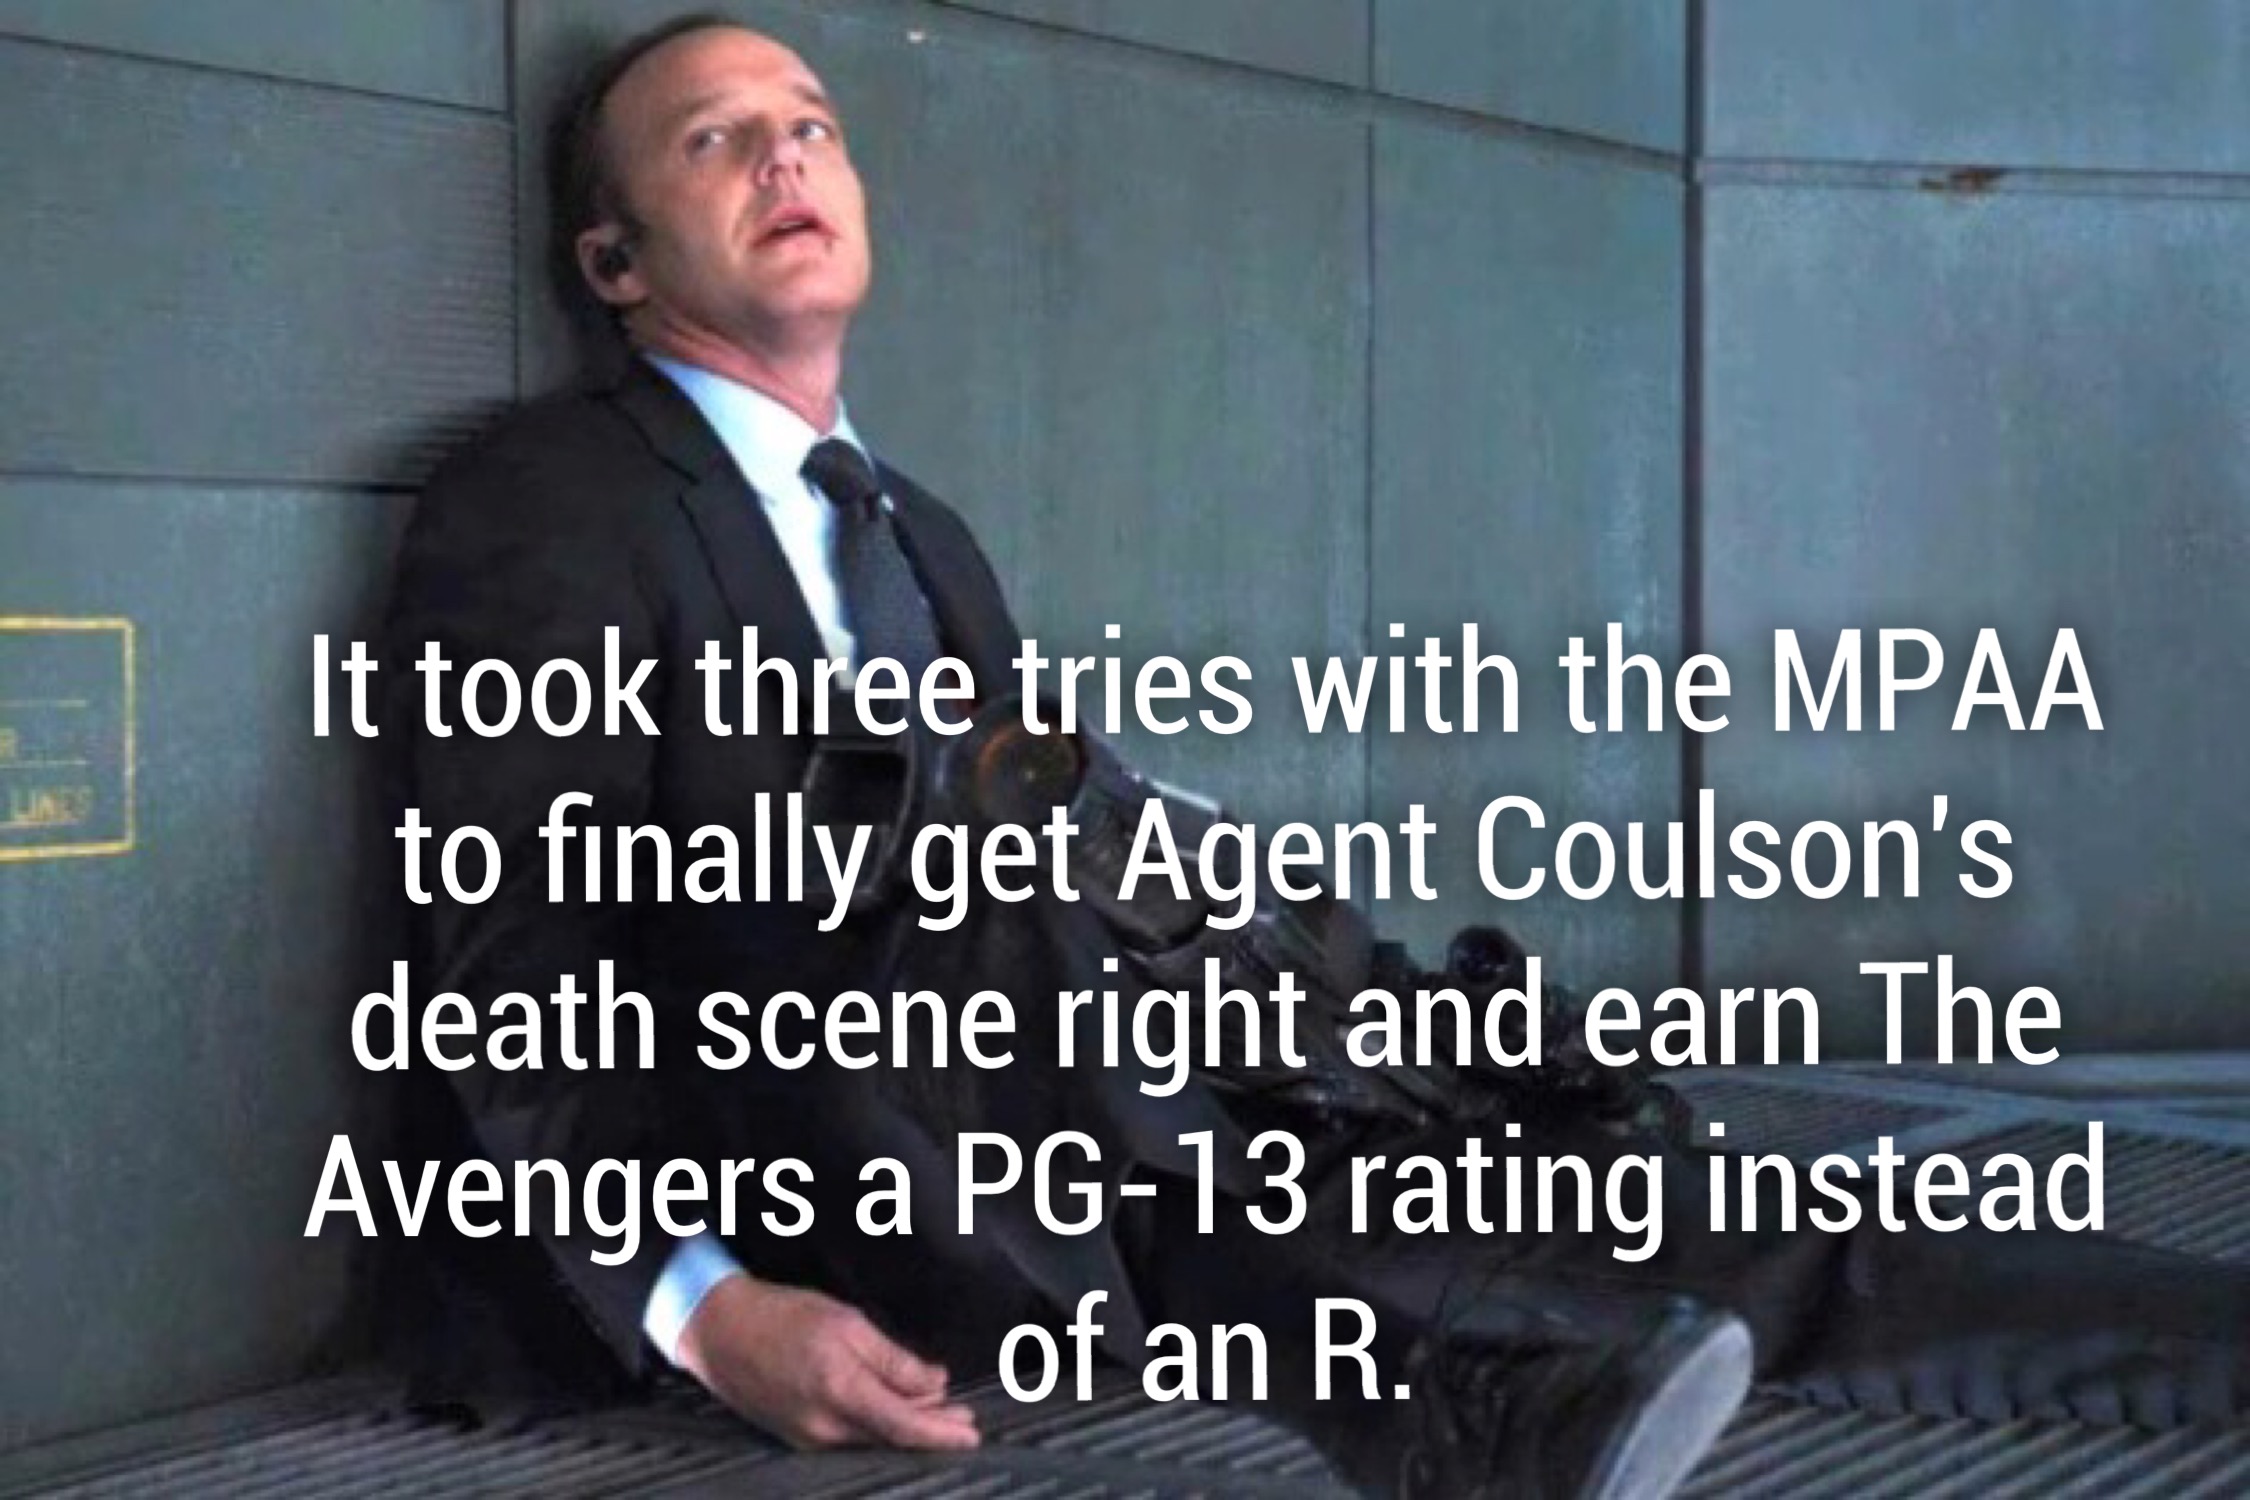 photo caption - It took three tries with the Mpaa to finally get Agent Coulson's death scene right and earn The Avengers a Pg13 rating instead of an R.